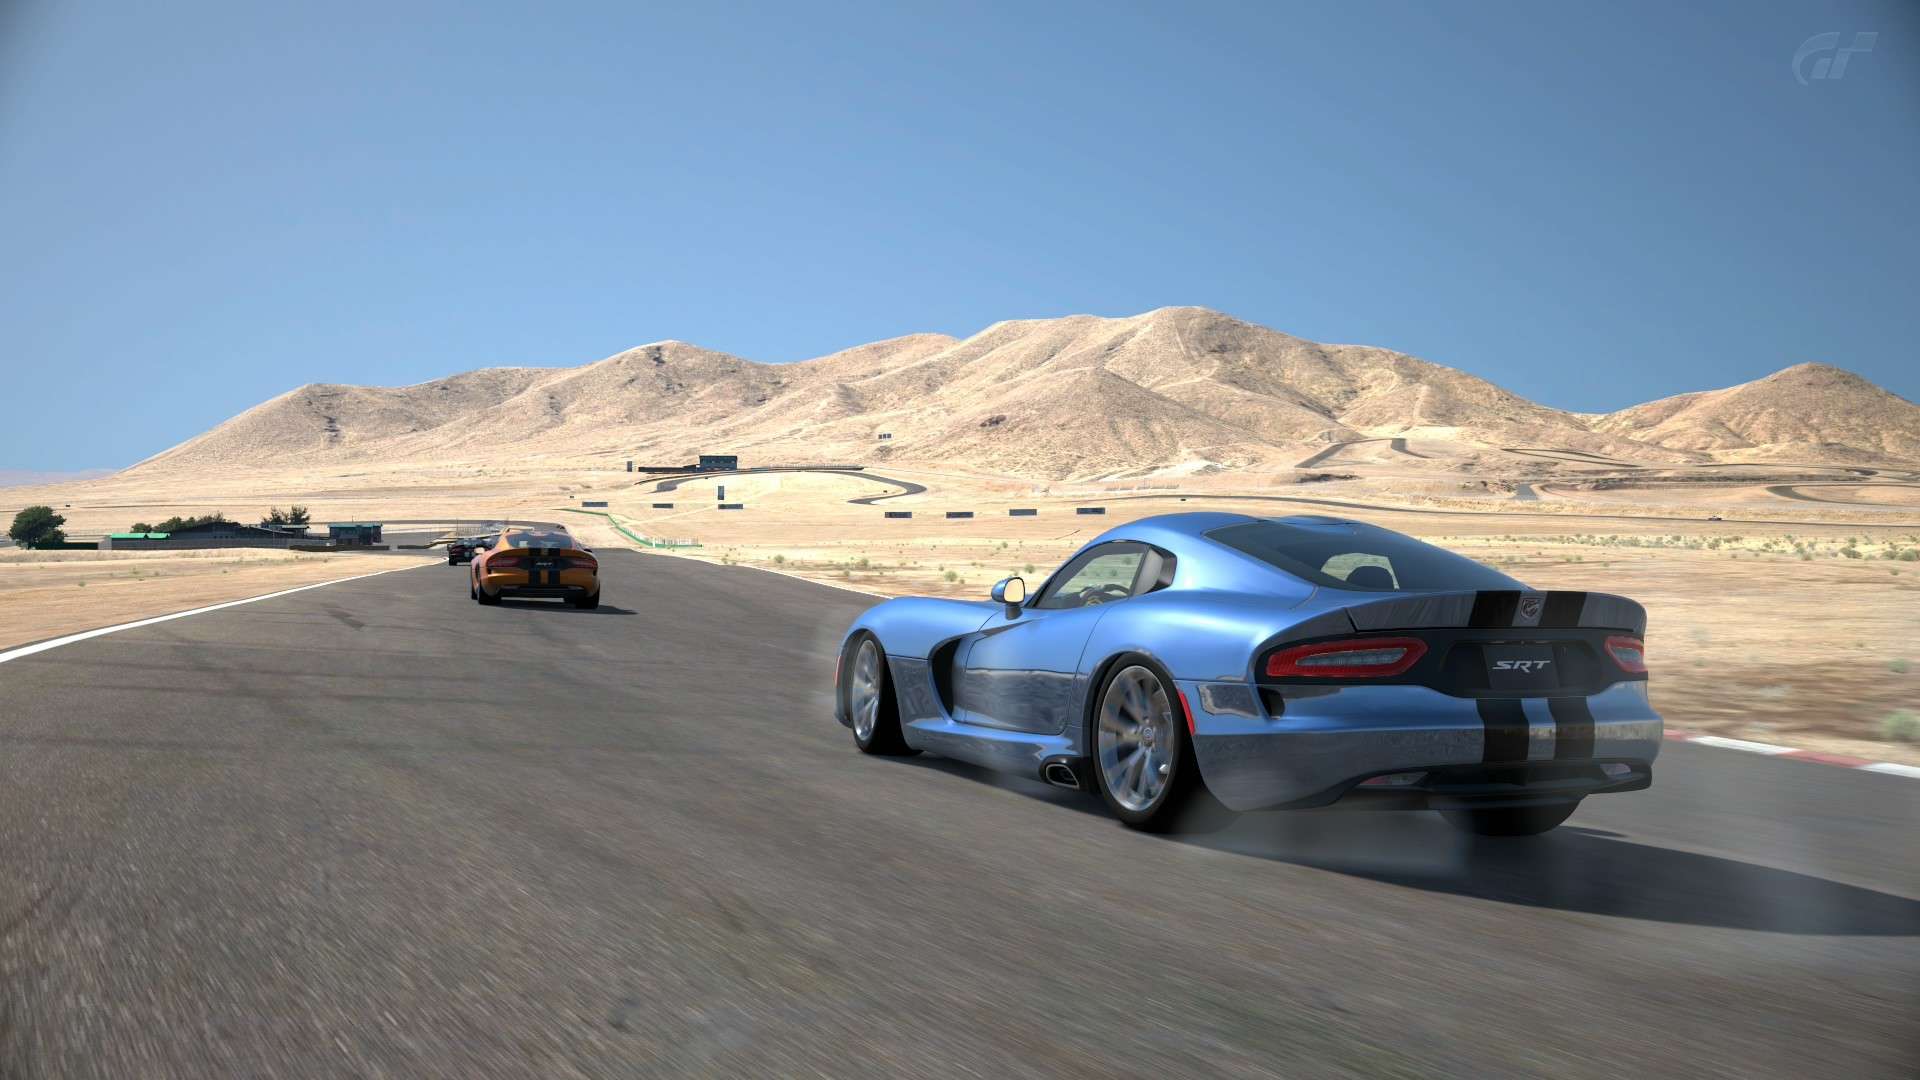 06 Willow Springs - Dodge Viper  [Fotos] Willow19